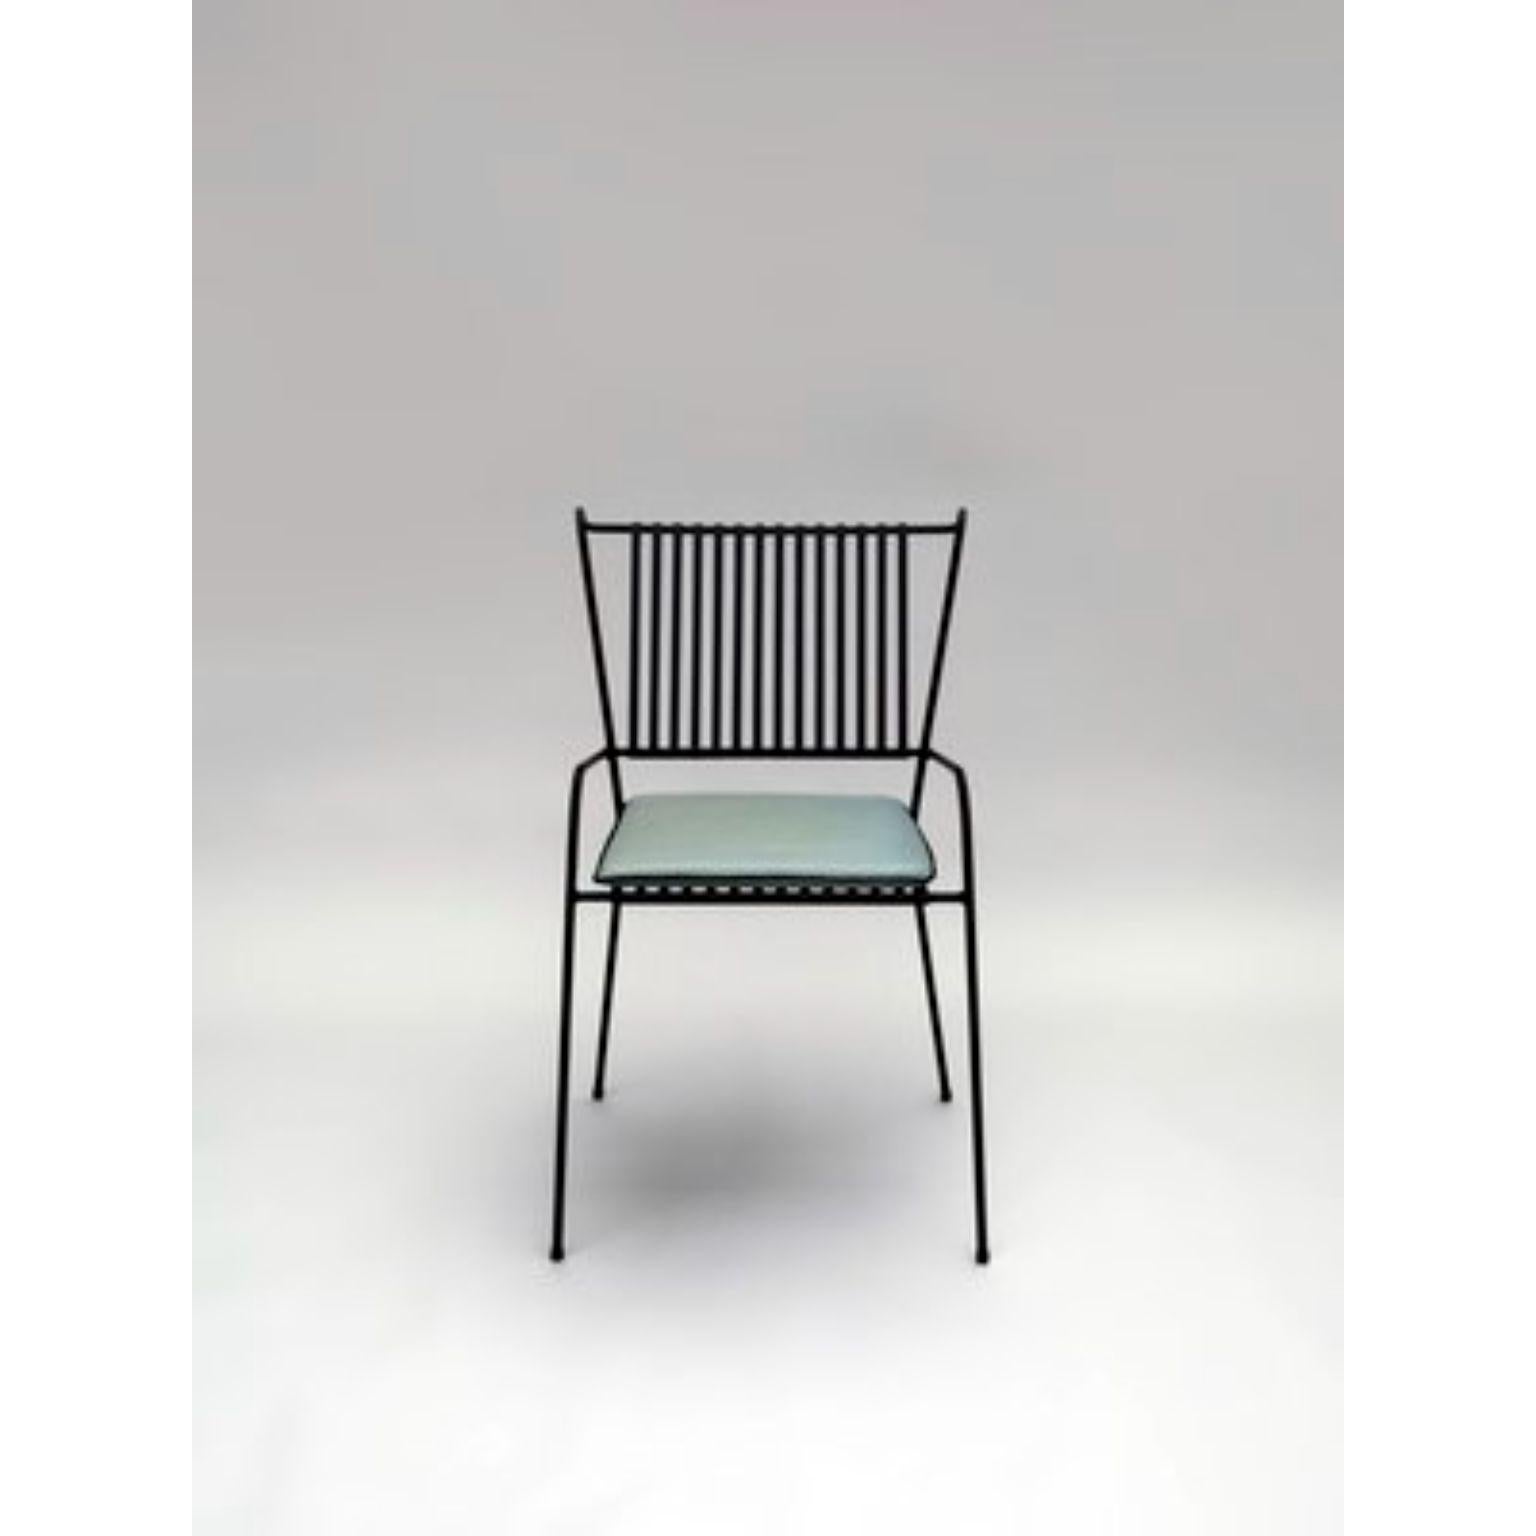 Black Capri chair with seat cushion by Cools Collection
Materials: Powder coated stainless steel, fabric suitable for outdoor use.
Dimensions: Chair: W 53 x D 60 x H 86 cm (seat height 45 cm).
Cushion: W 42 x D 42 x H 2cm.
Available in white or